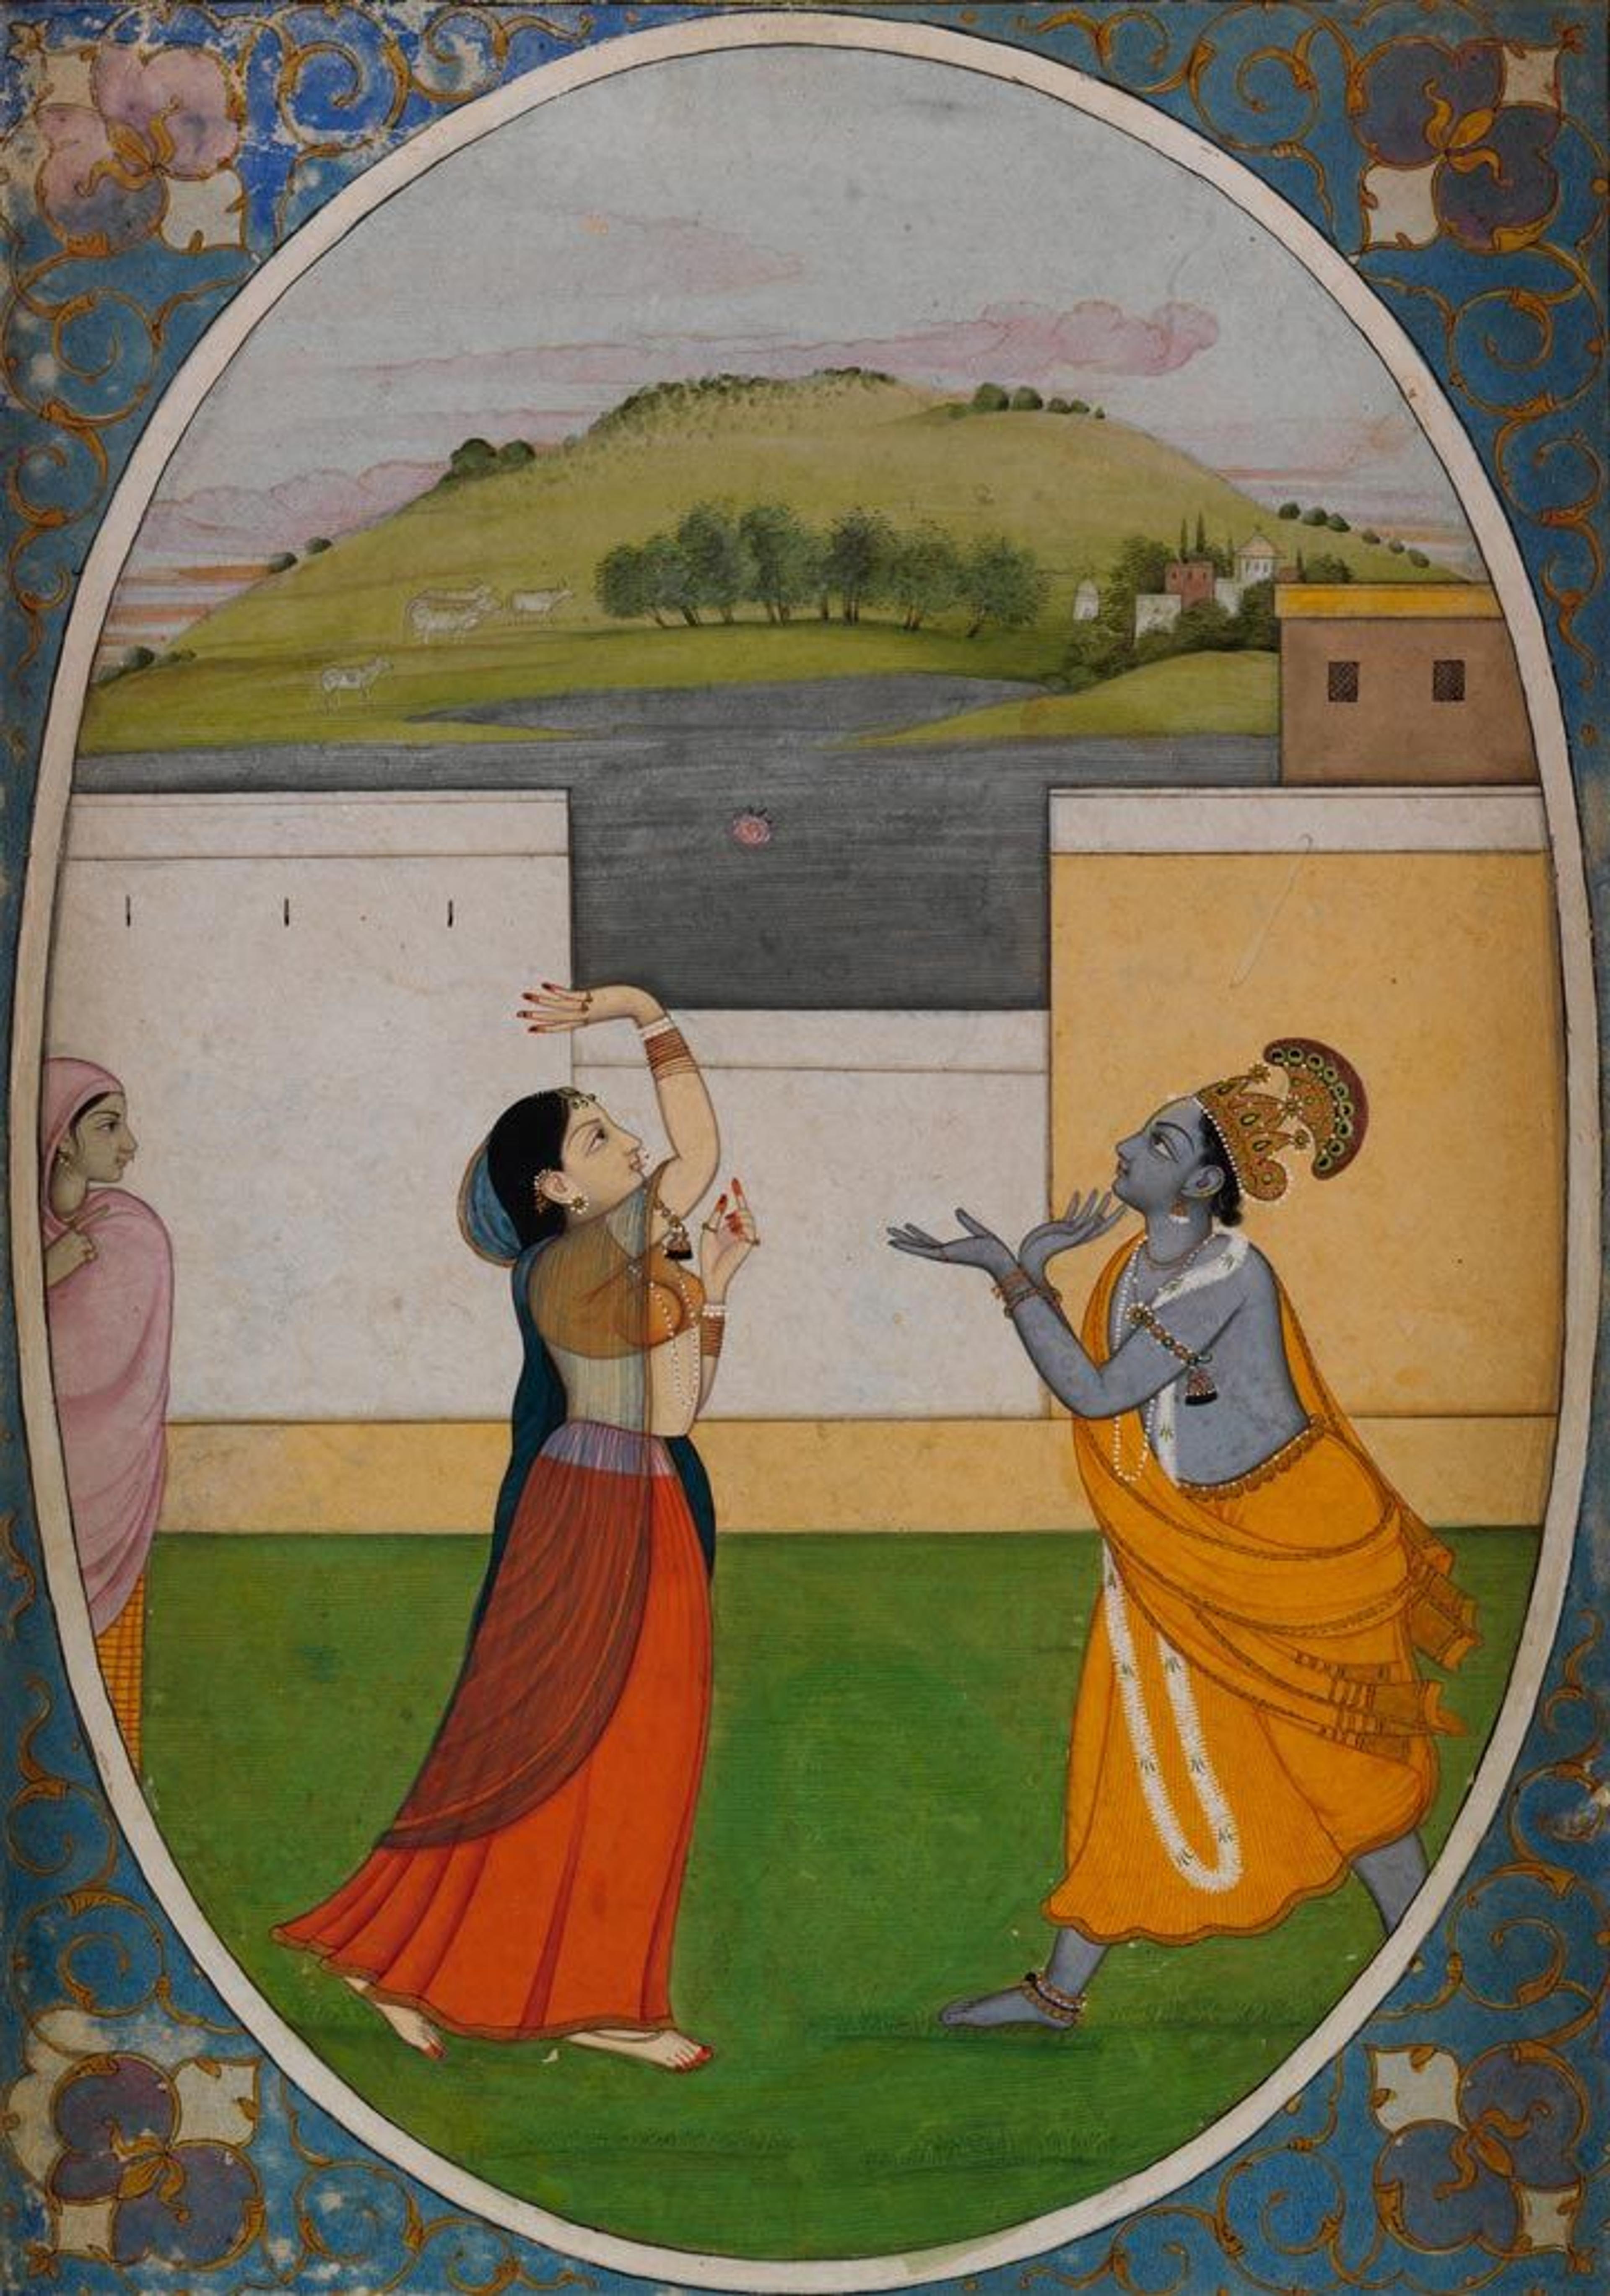 An 18th-century Indian painting depicting two deities, Krishna and Radha, tossing a flower to each other